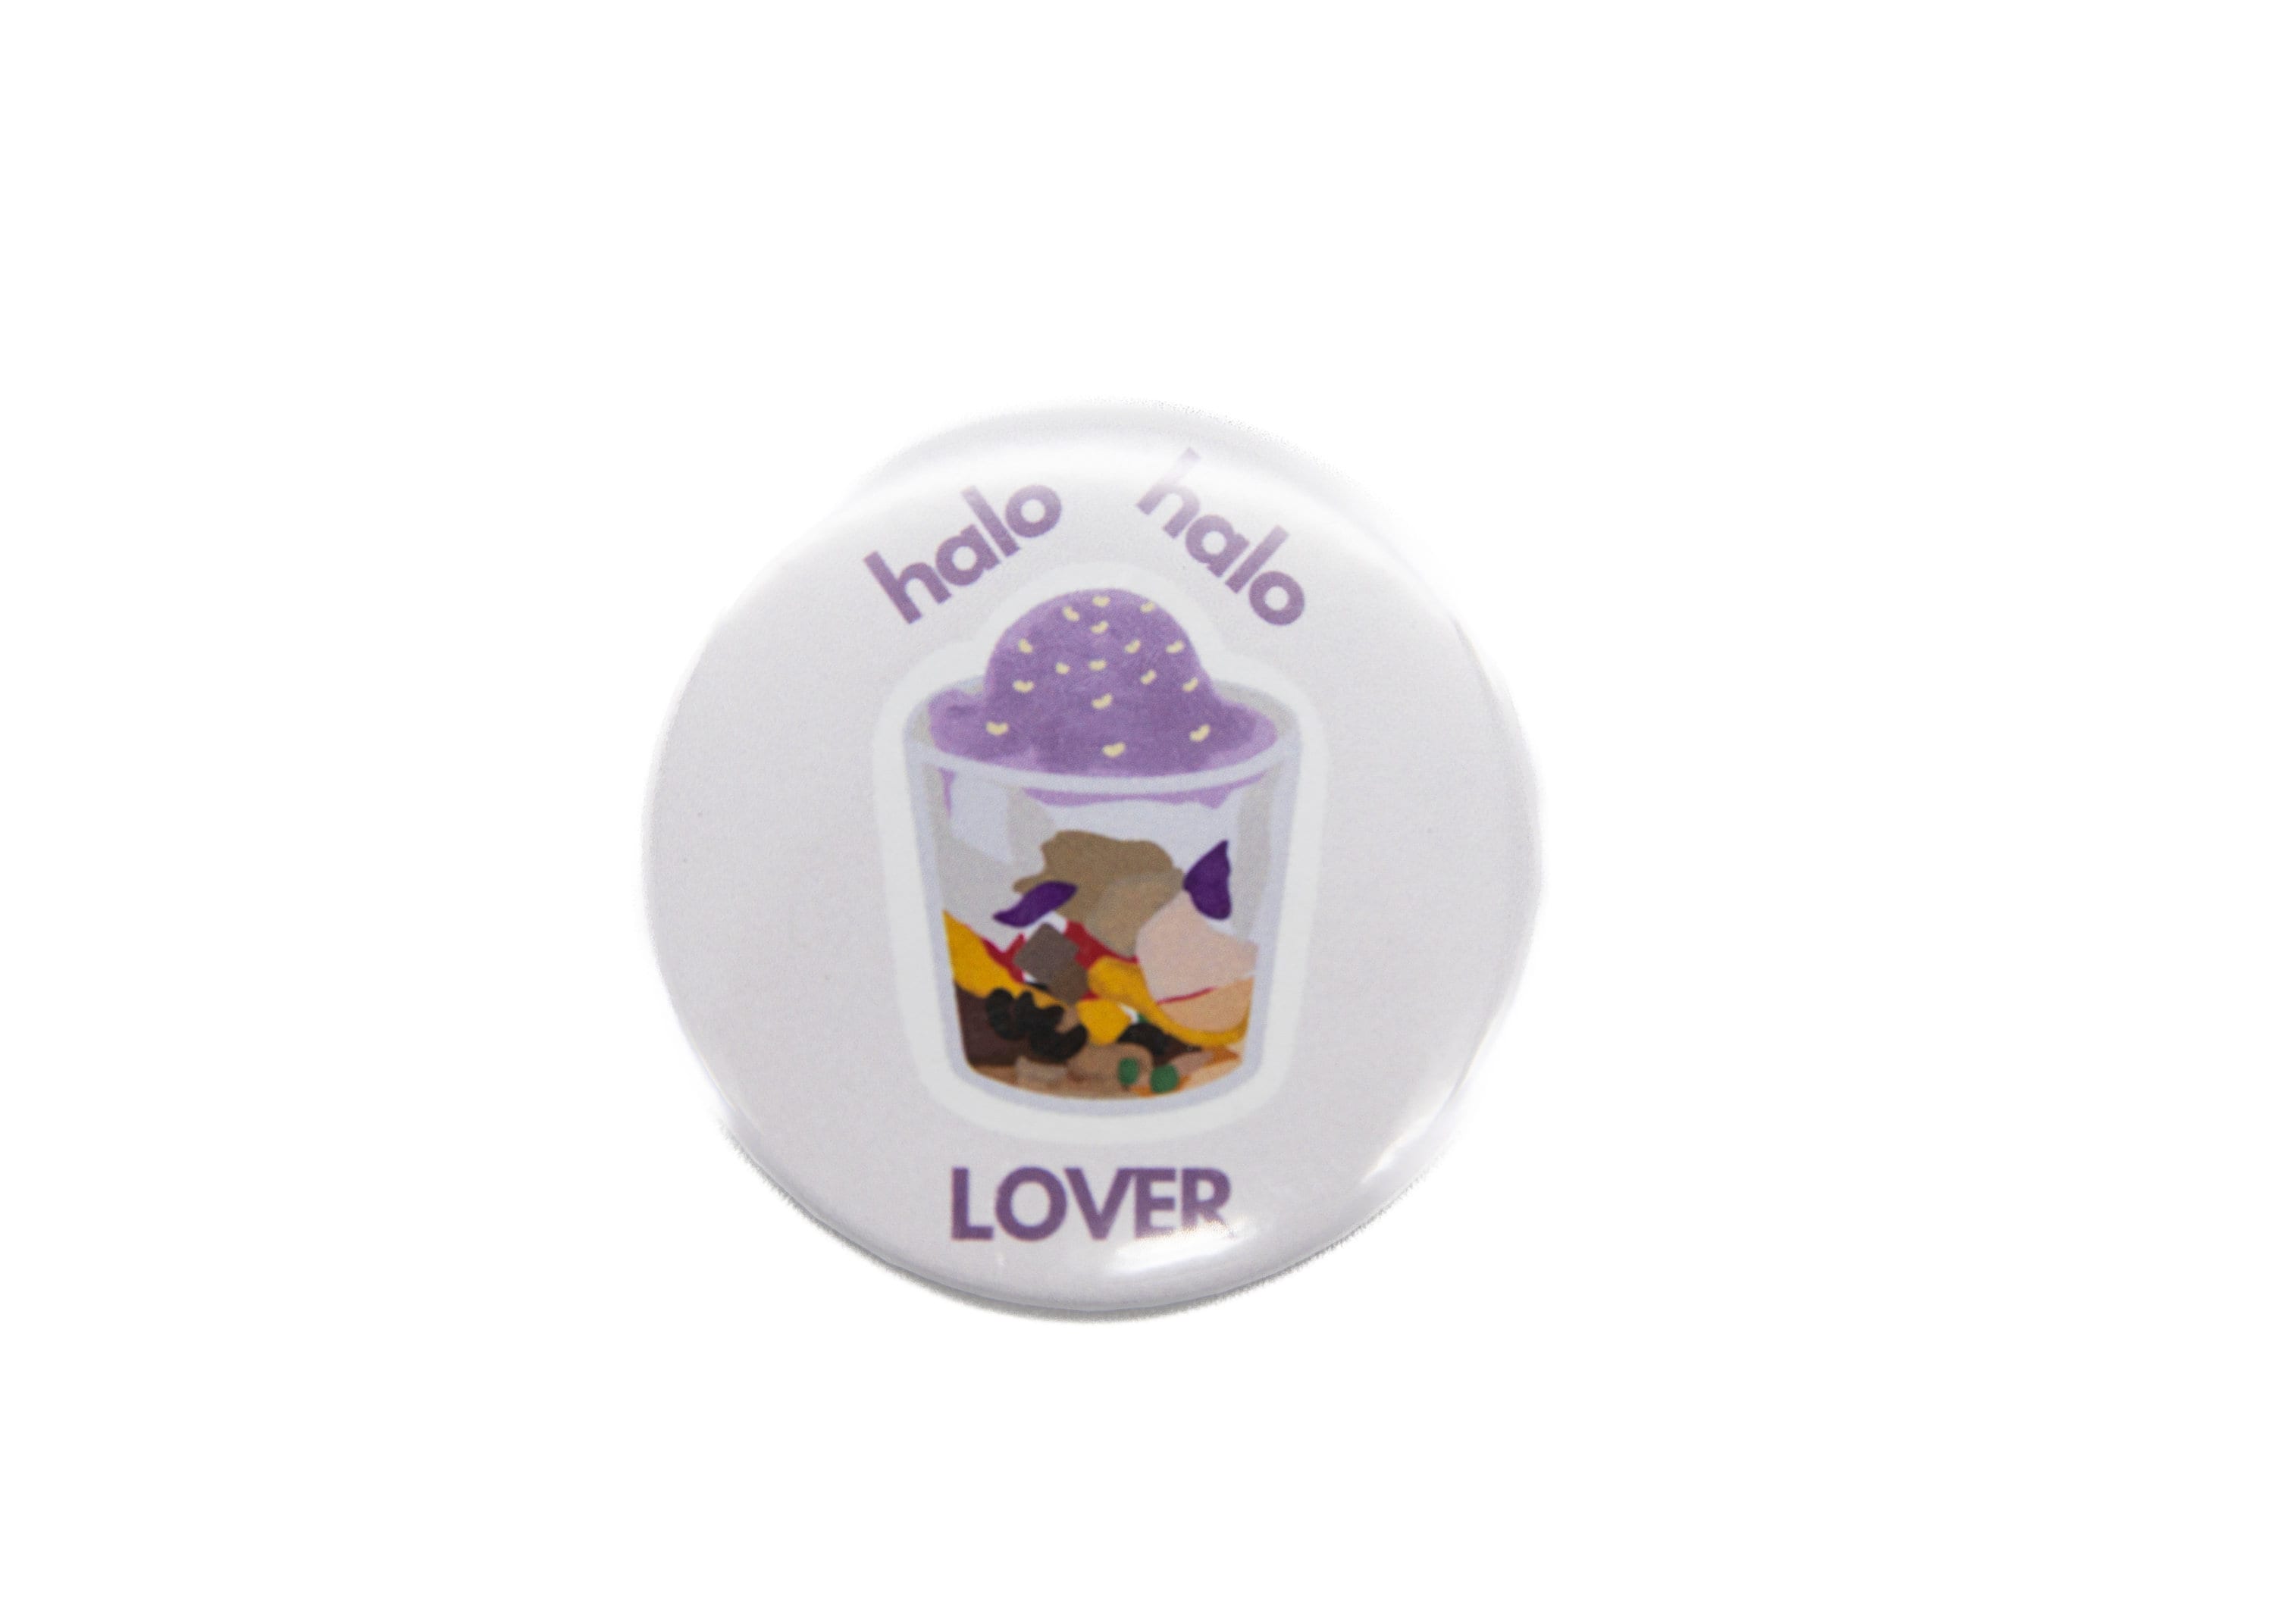 Mie Makes Halo Halo Lover Button, Round Filipino Button, Button Pins, Dessert Buttons, Filipina